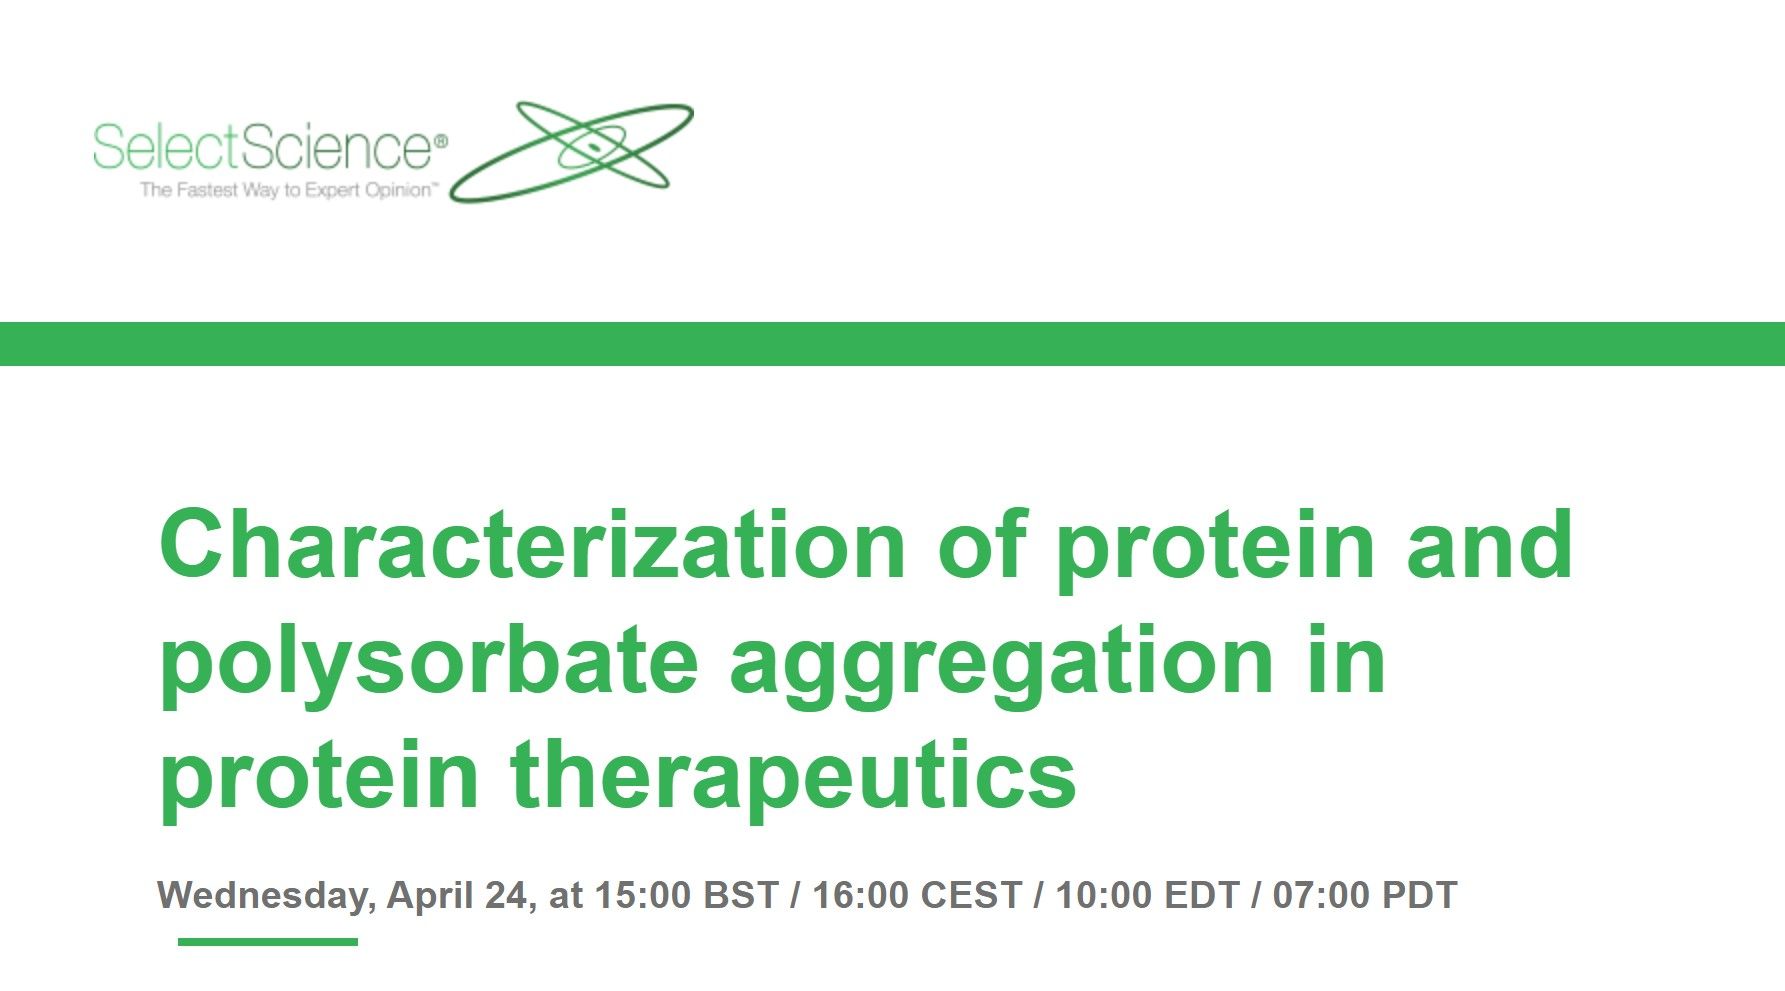 SelectScience: Characterization of protein and polysorbate aggregation in protein therapeutics